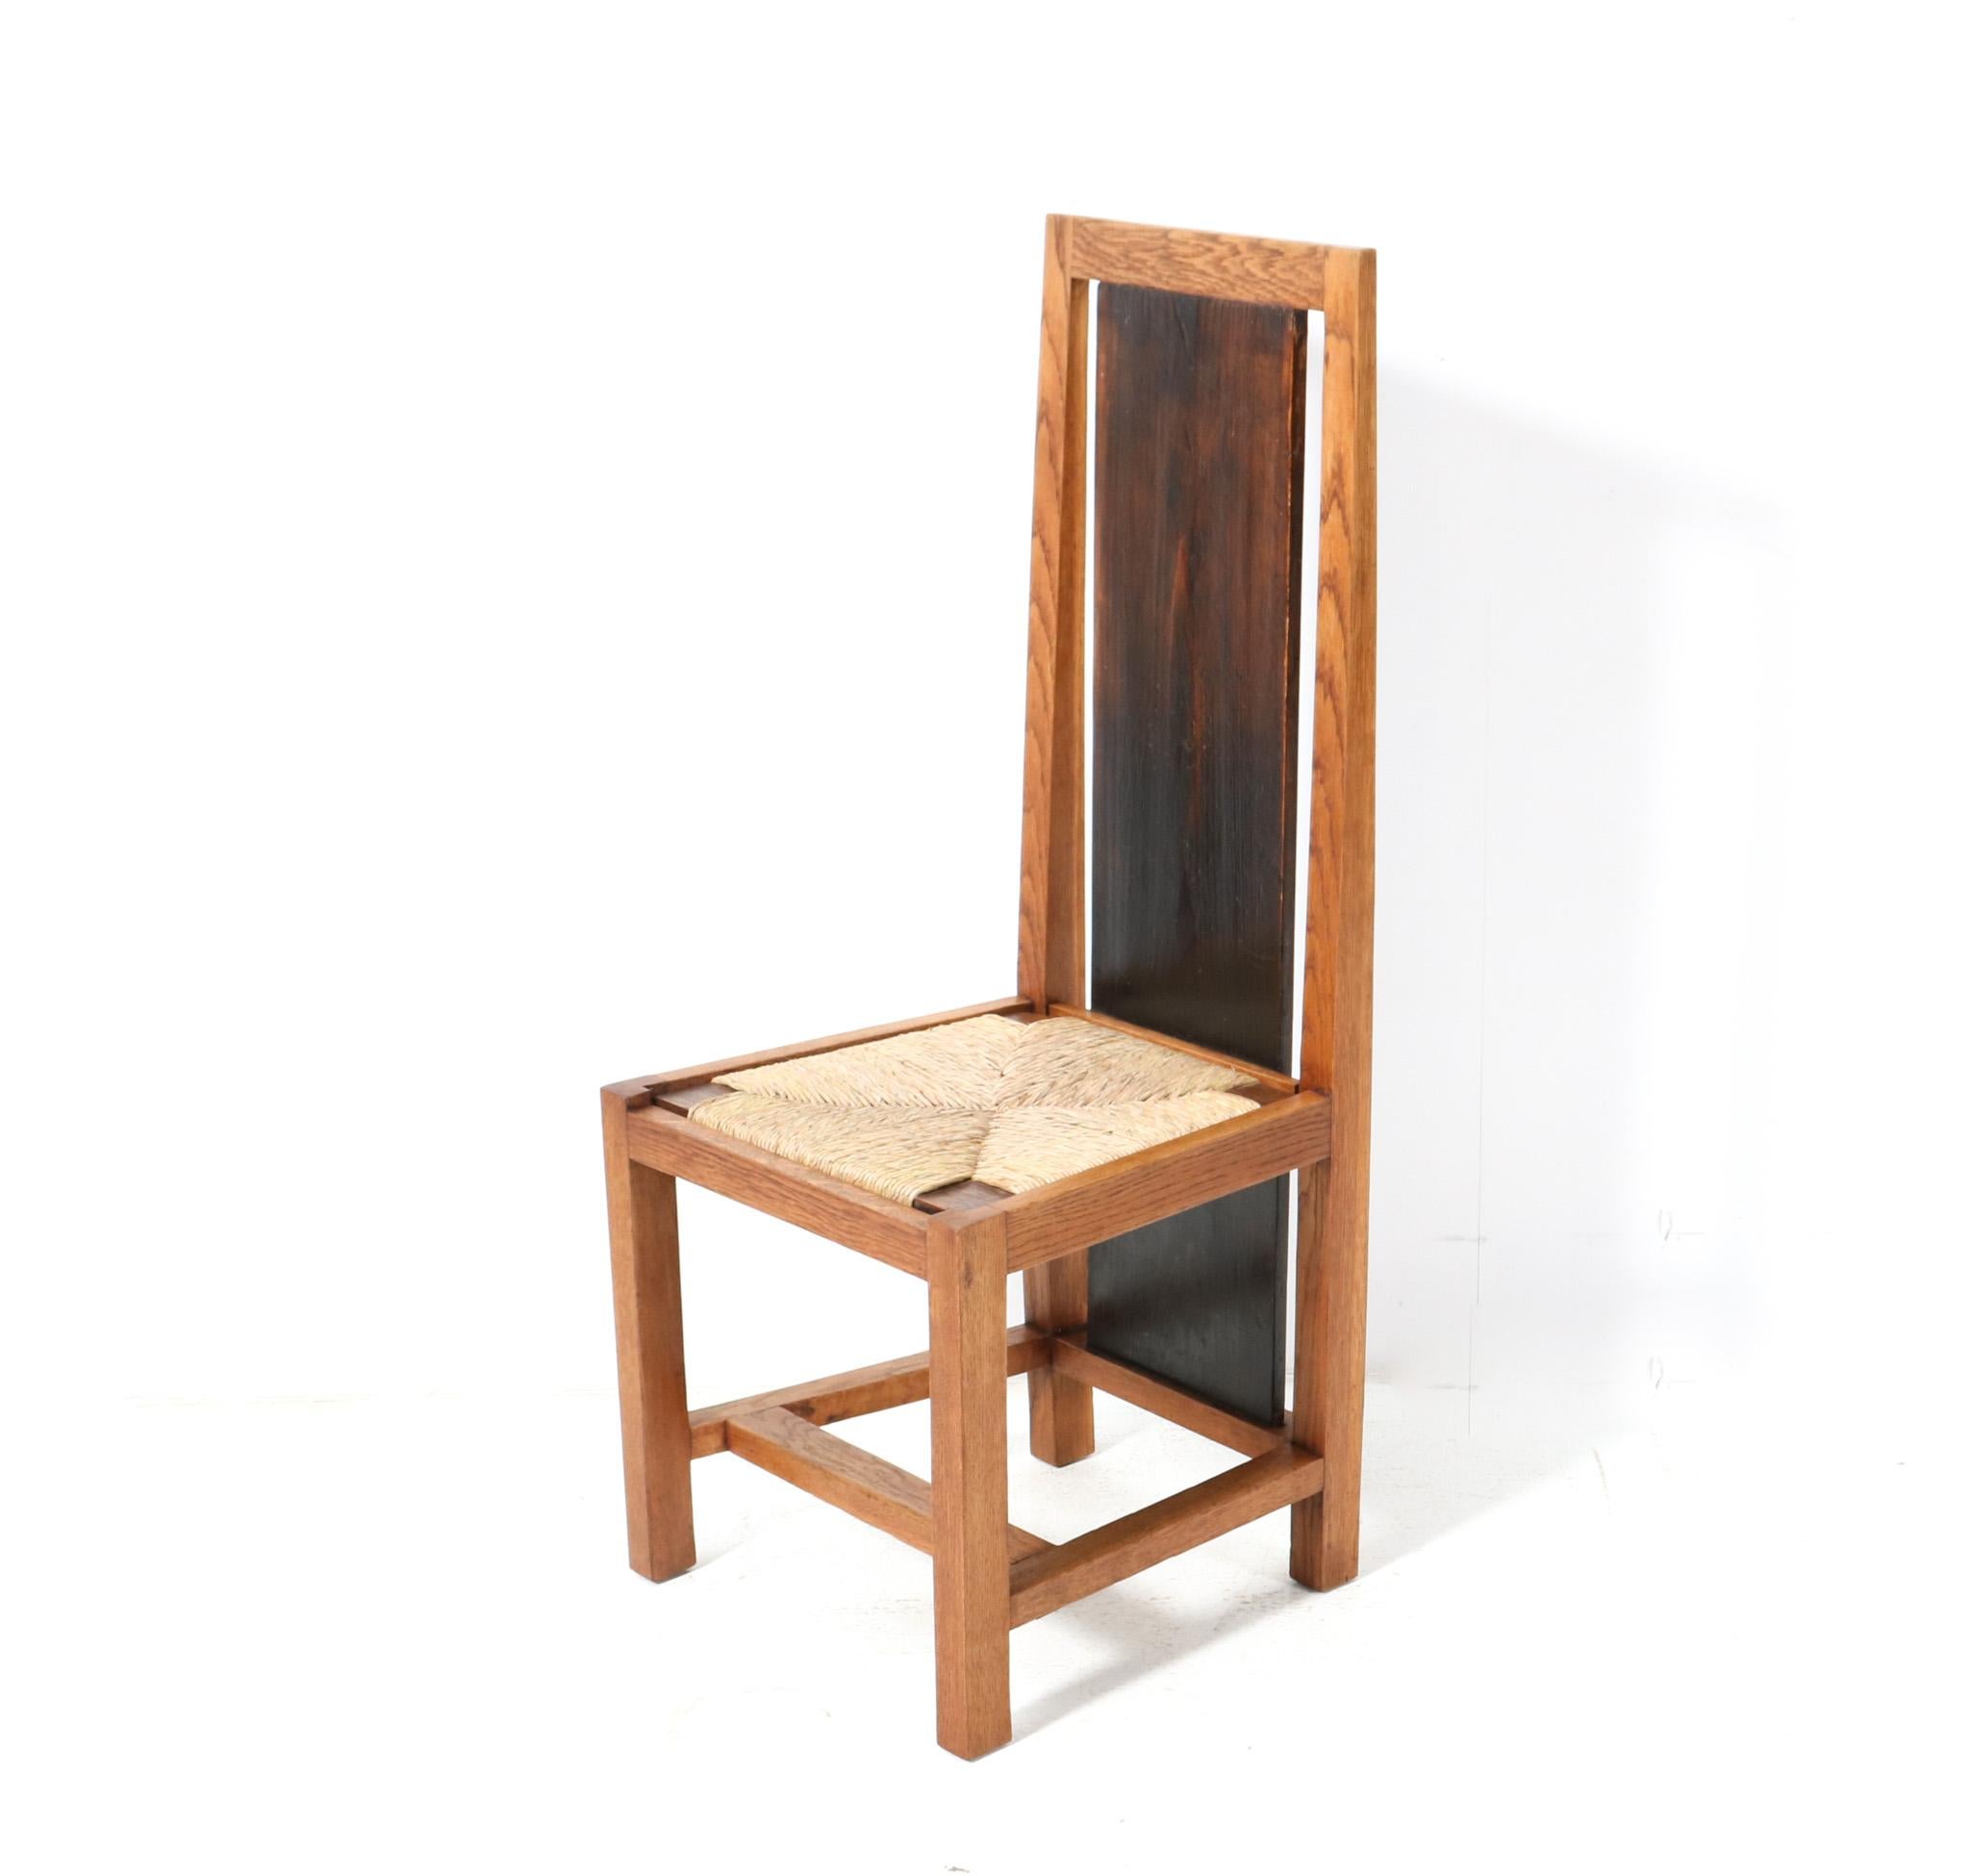 Early 20th Century  Art Deco Modernist Oak High Back Chair by Cor Alons, 1923 For Sale